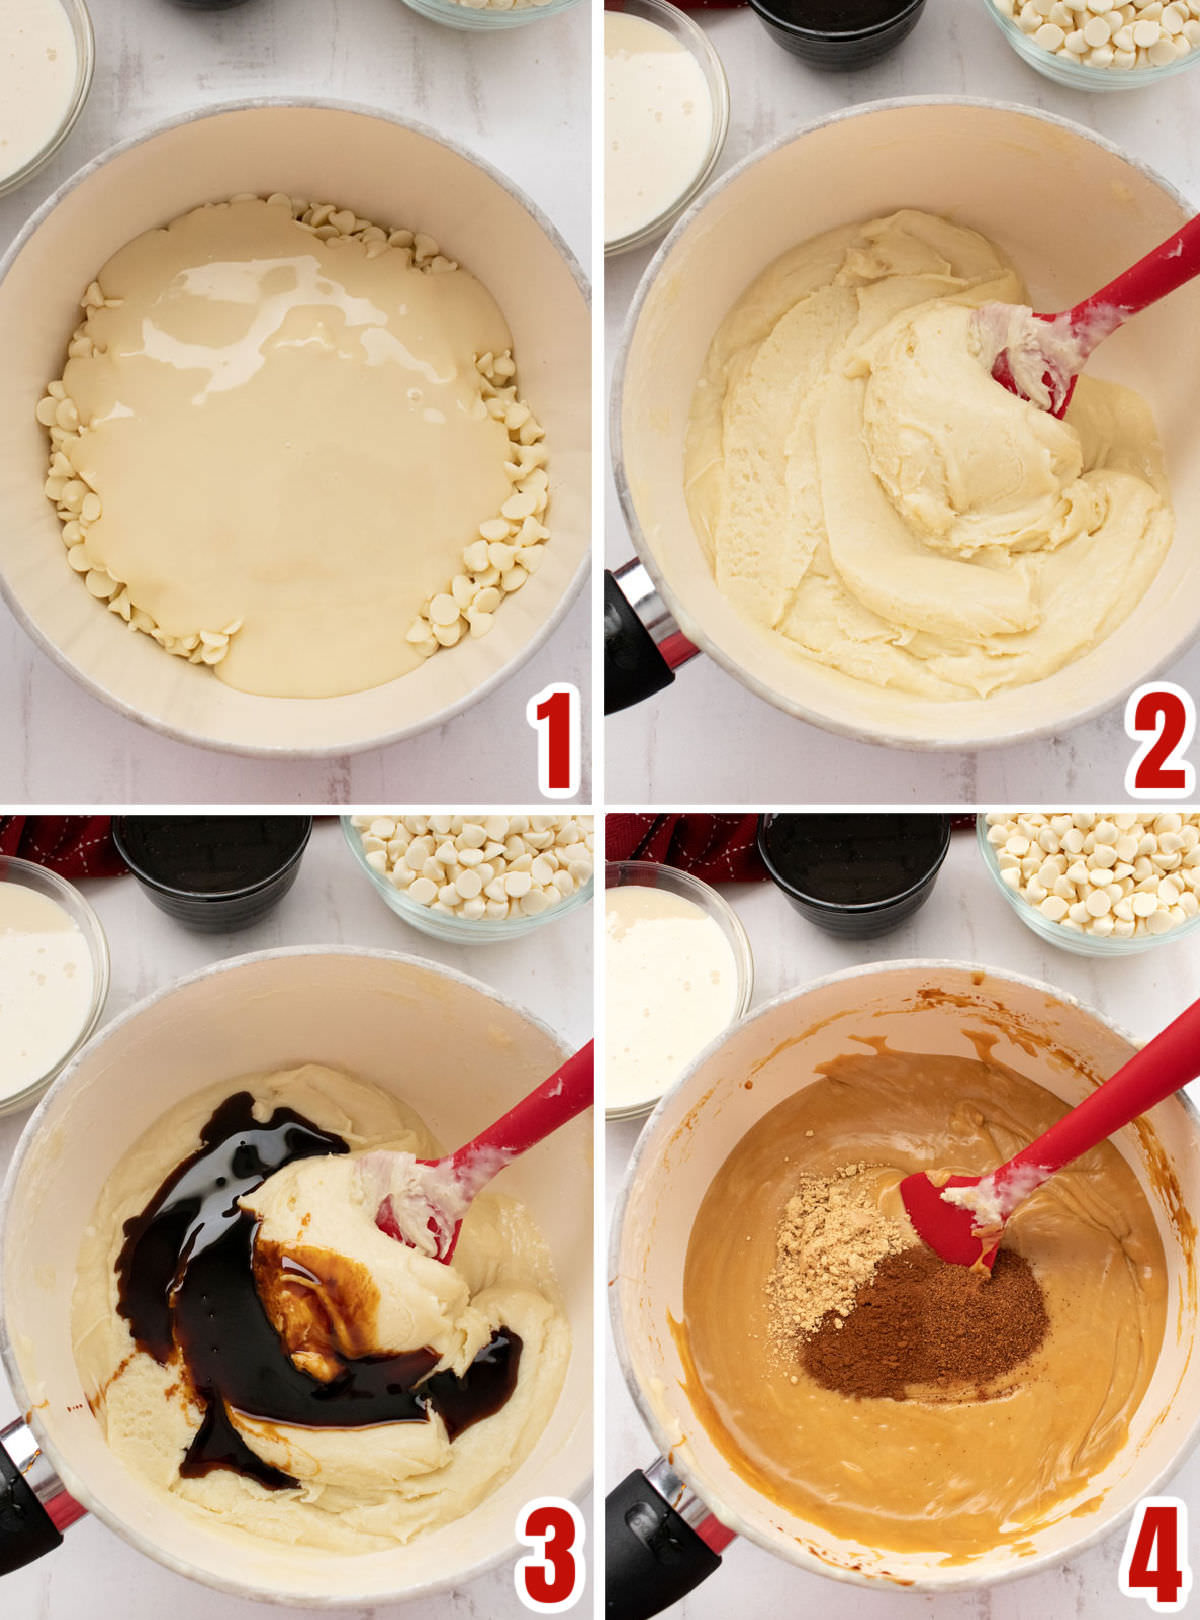 Collage images showing the steps for how to make the Gingerbread Fudge mixture.